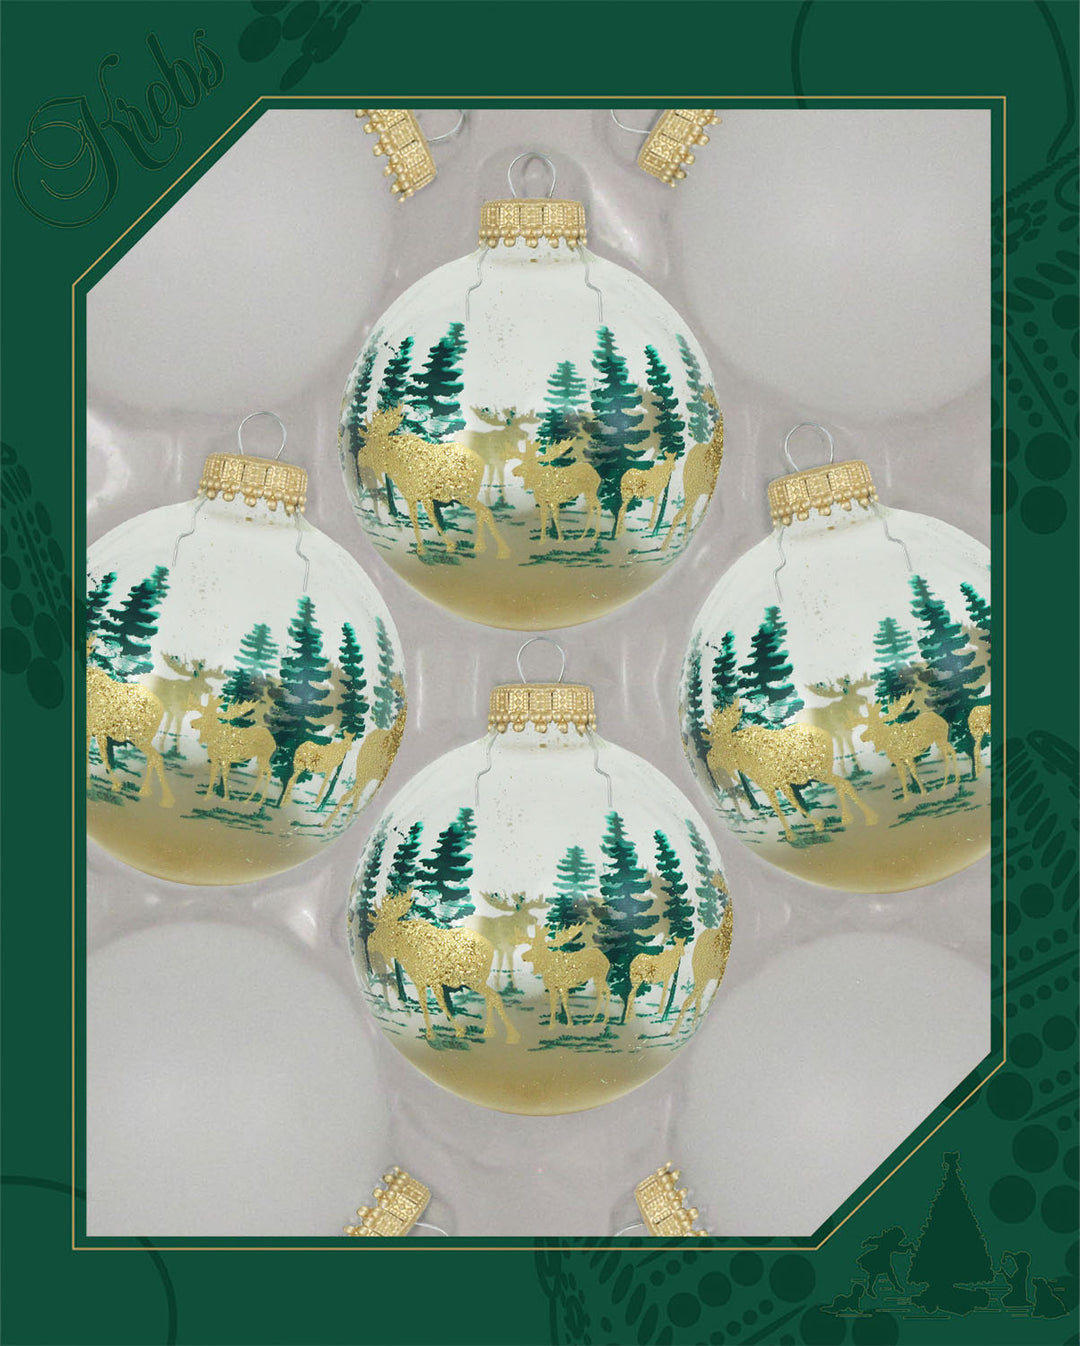 2 5/8" (67mm) Ball Ornaments, Snow White with Clear Glass Moose Scene assortment, 8/Box, 12/Case, 96 Pieces